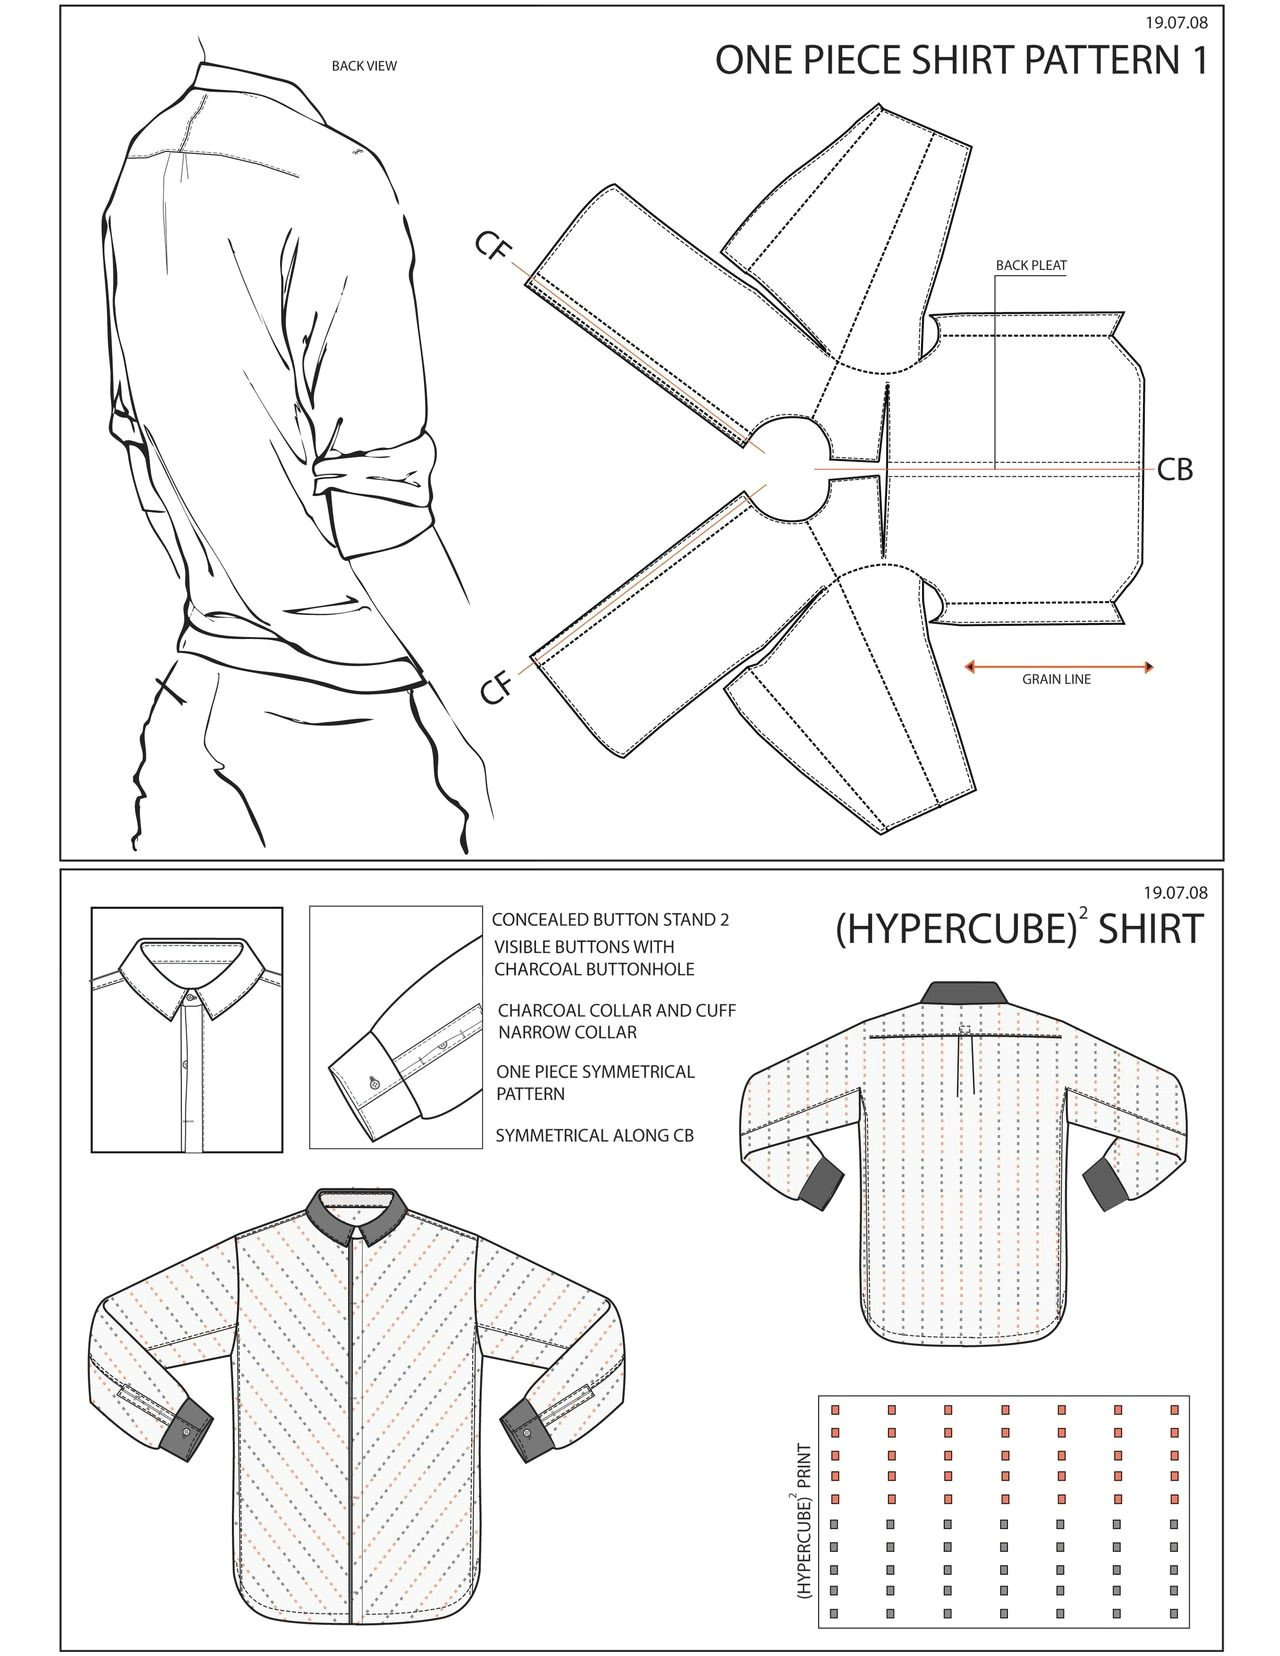 Drawing T Shirt Pattern One Piece Shirt Experimental Pattern Cutting Pattern Done by Me